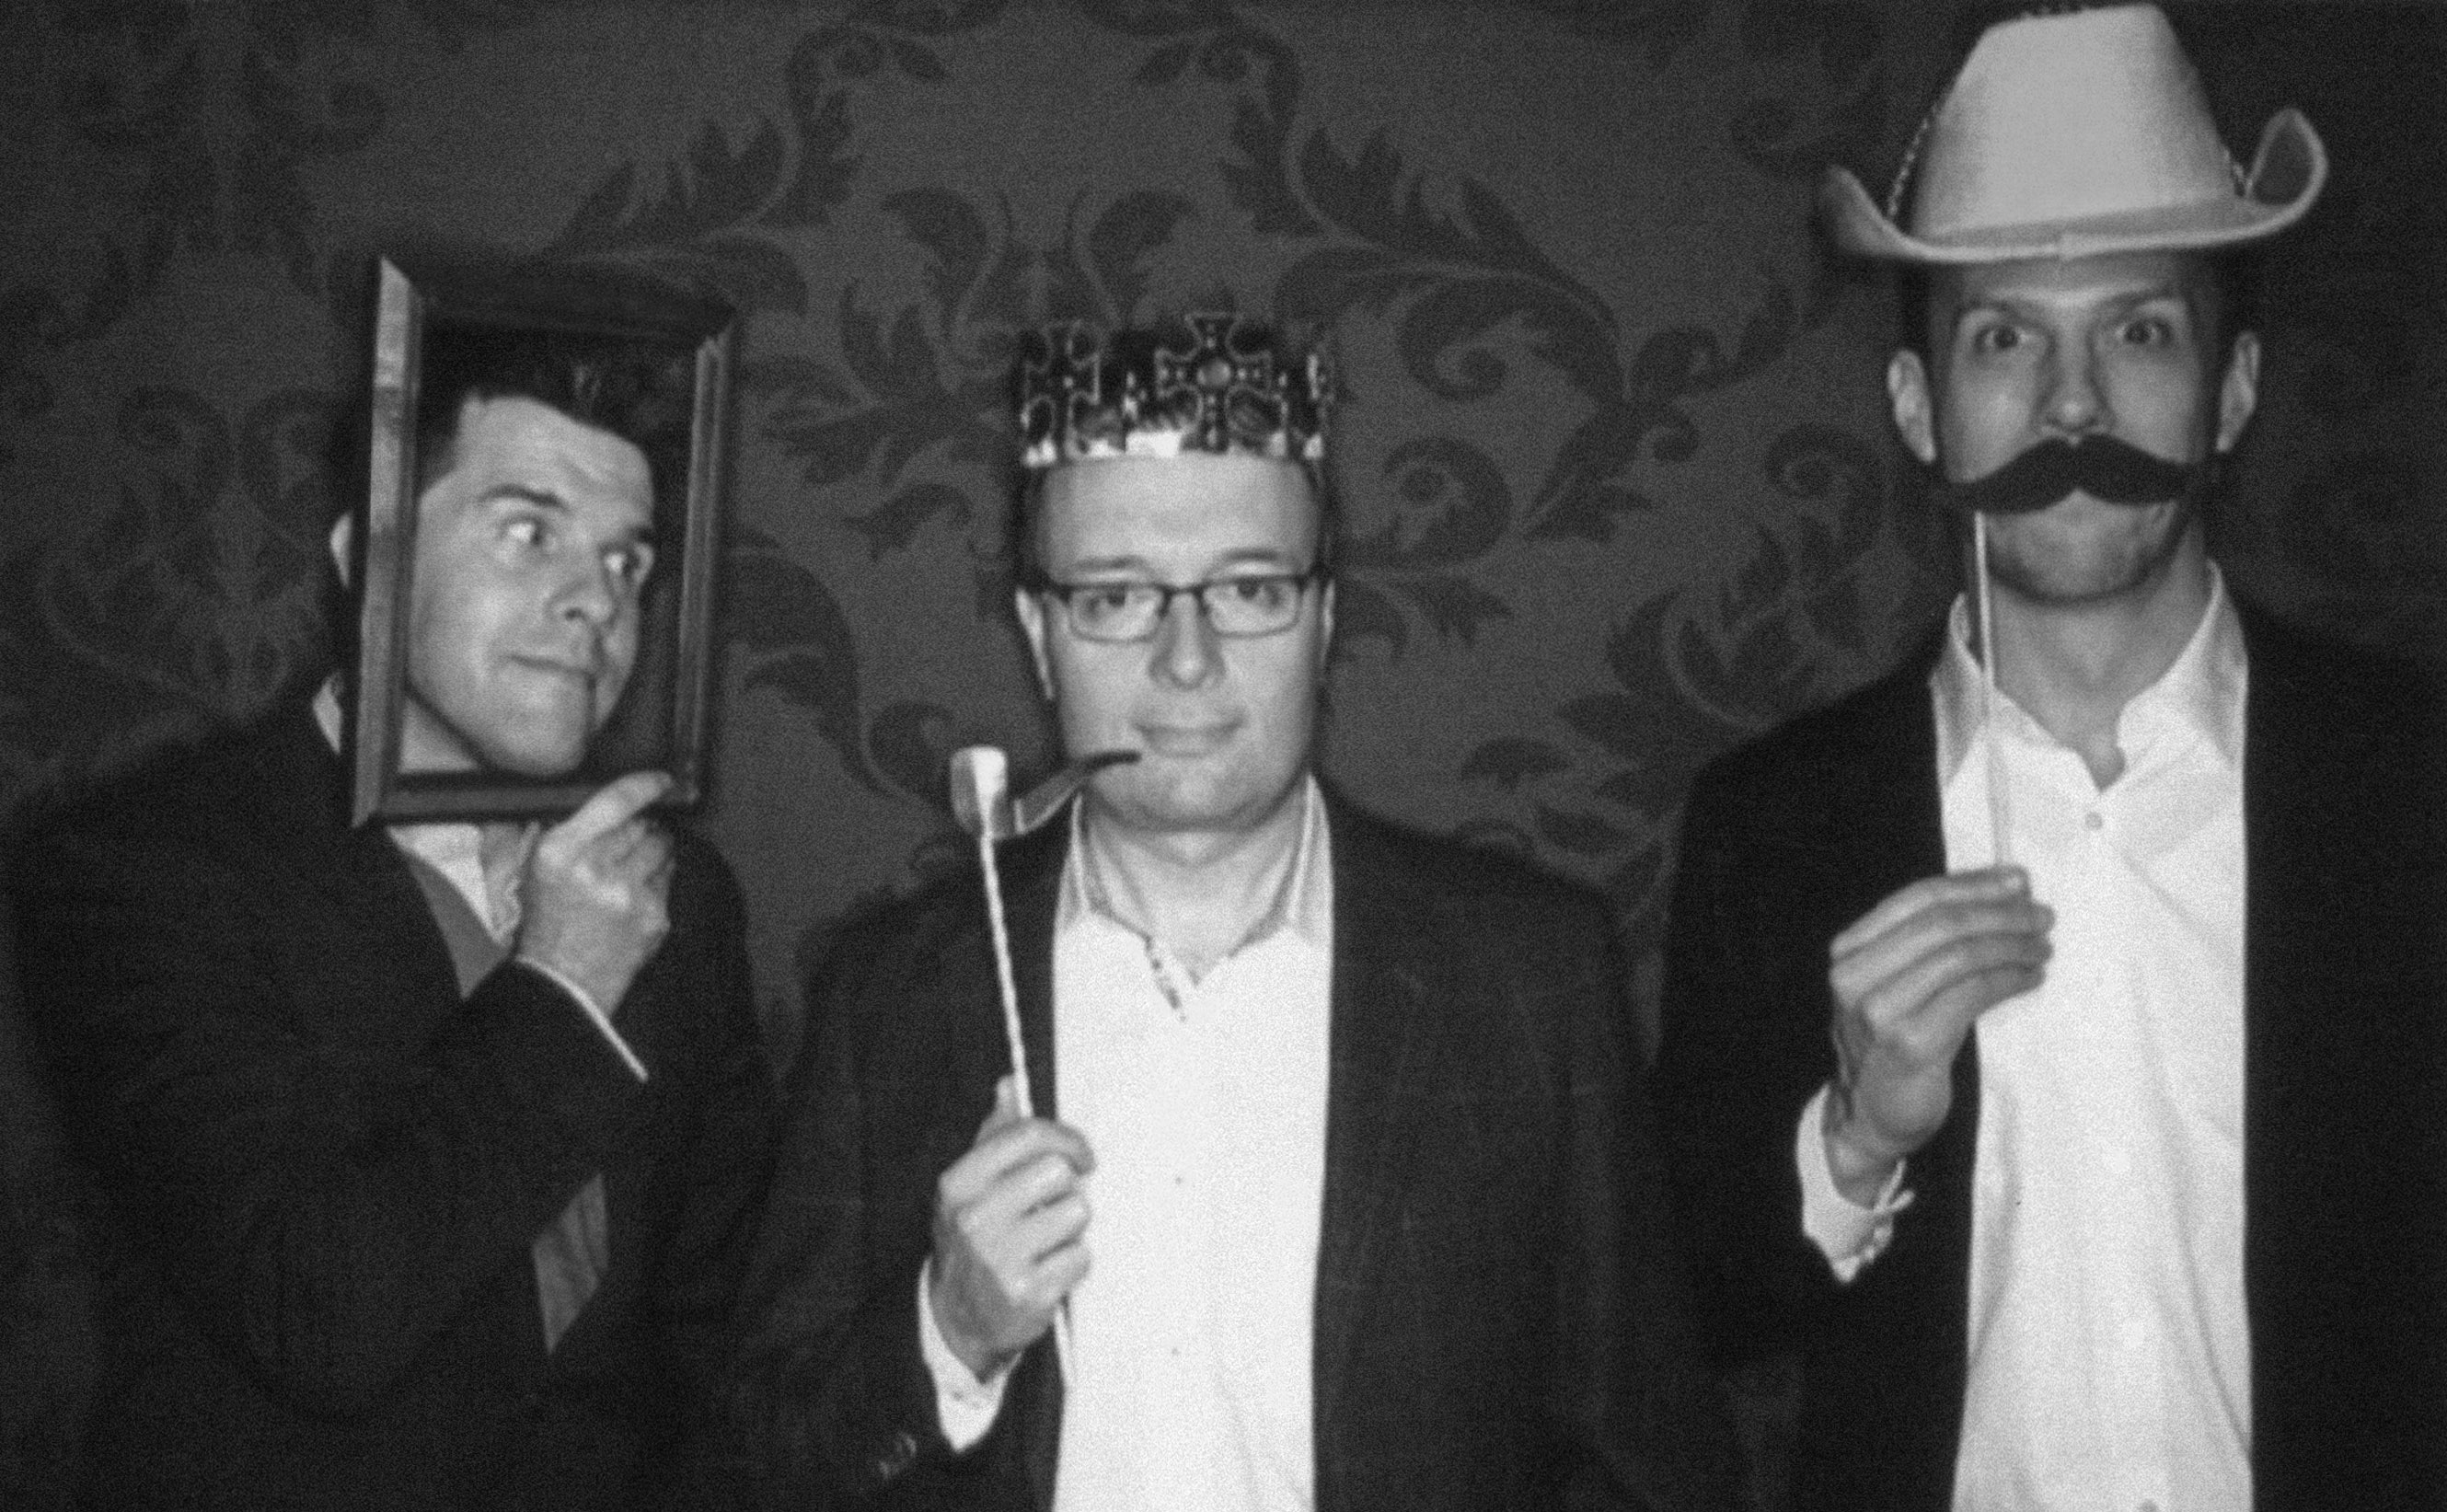 Marley Natural Website & Social Campaign Wins ADDYs: Blake, Ian & Colin at the at Seattle's 2015 ADDYs Photobooth, Shot 3